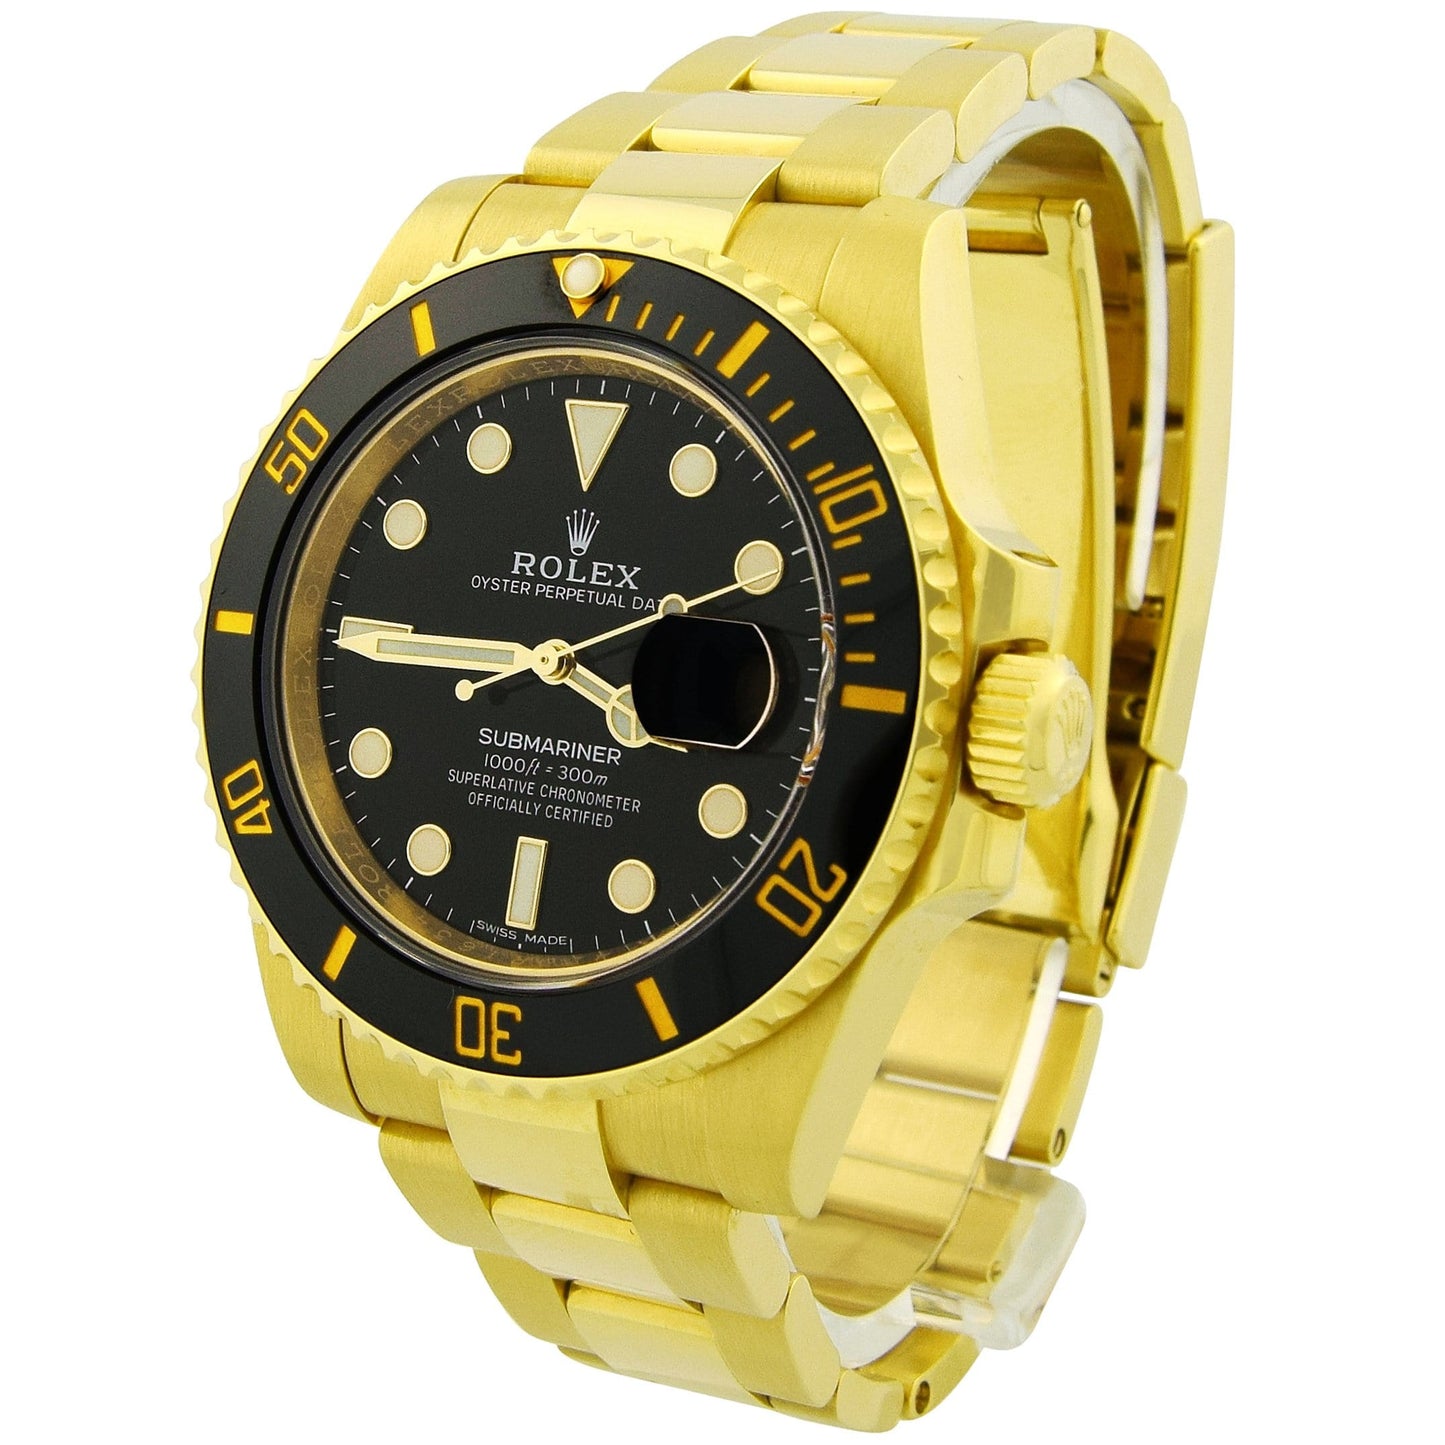 Rolex Submariner Yellow Gold 40mm Black Dot Dial Watch Reference#: 116618LN - Happy Jewelers Fine Jewelry Lifetime Warranty